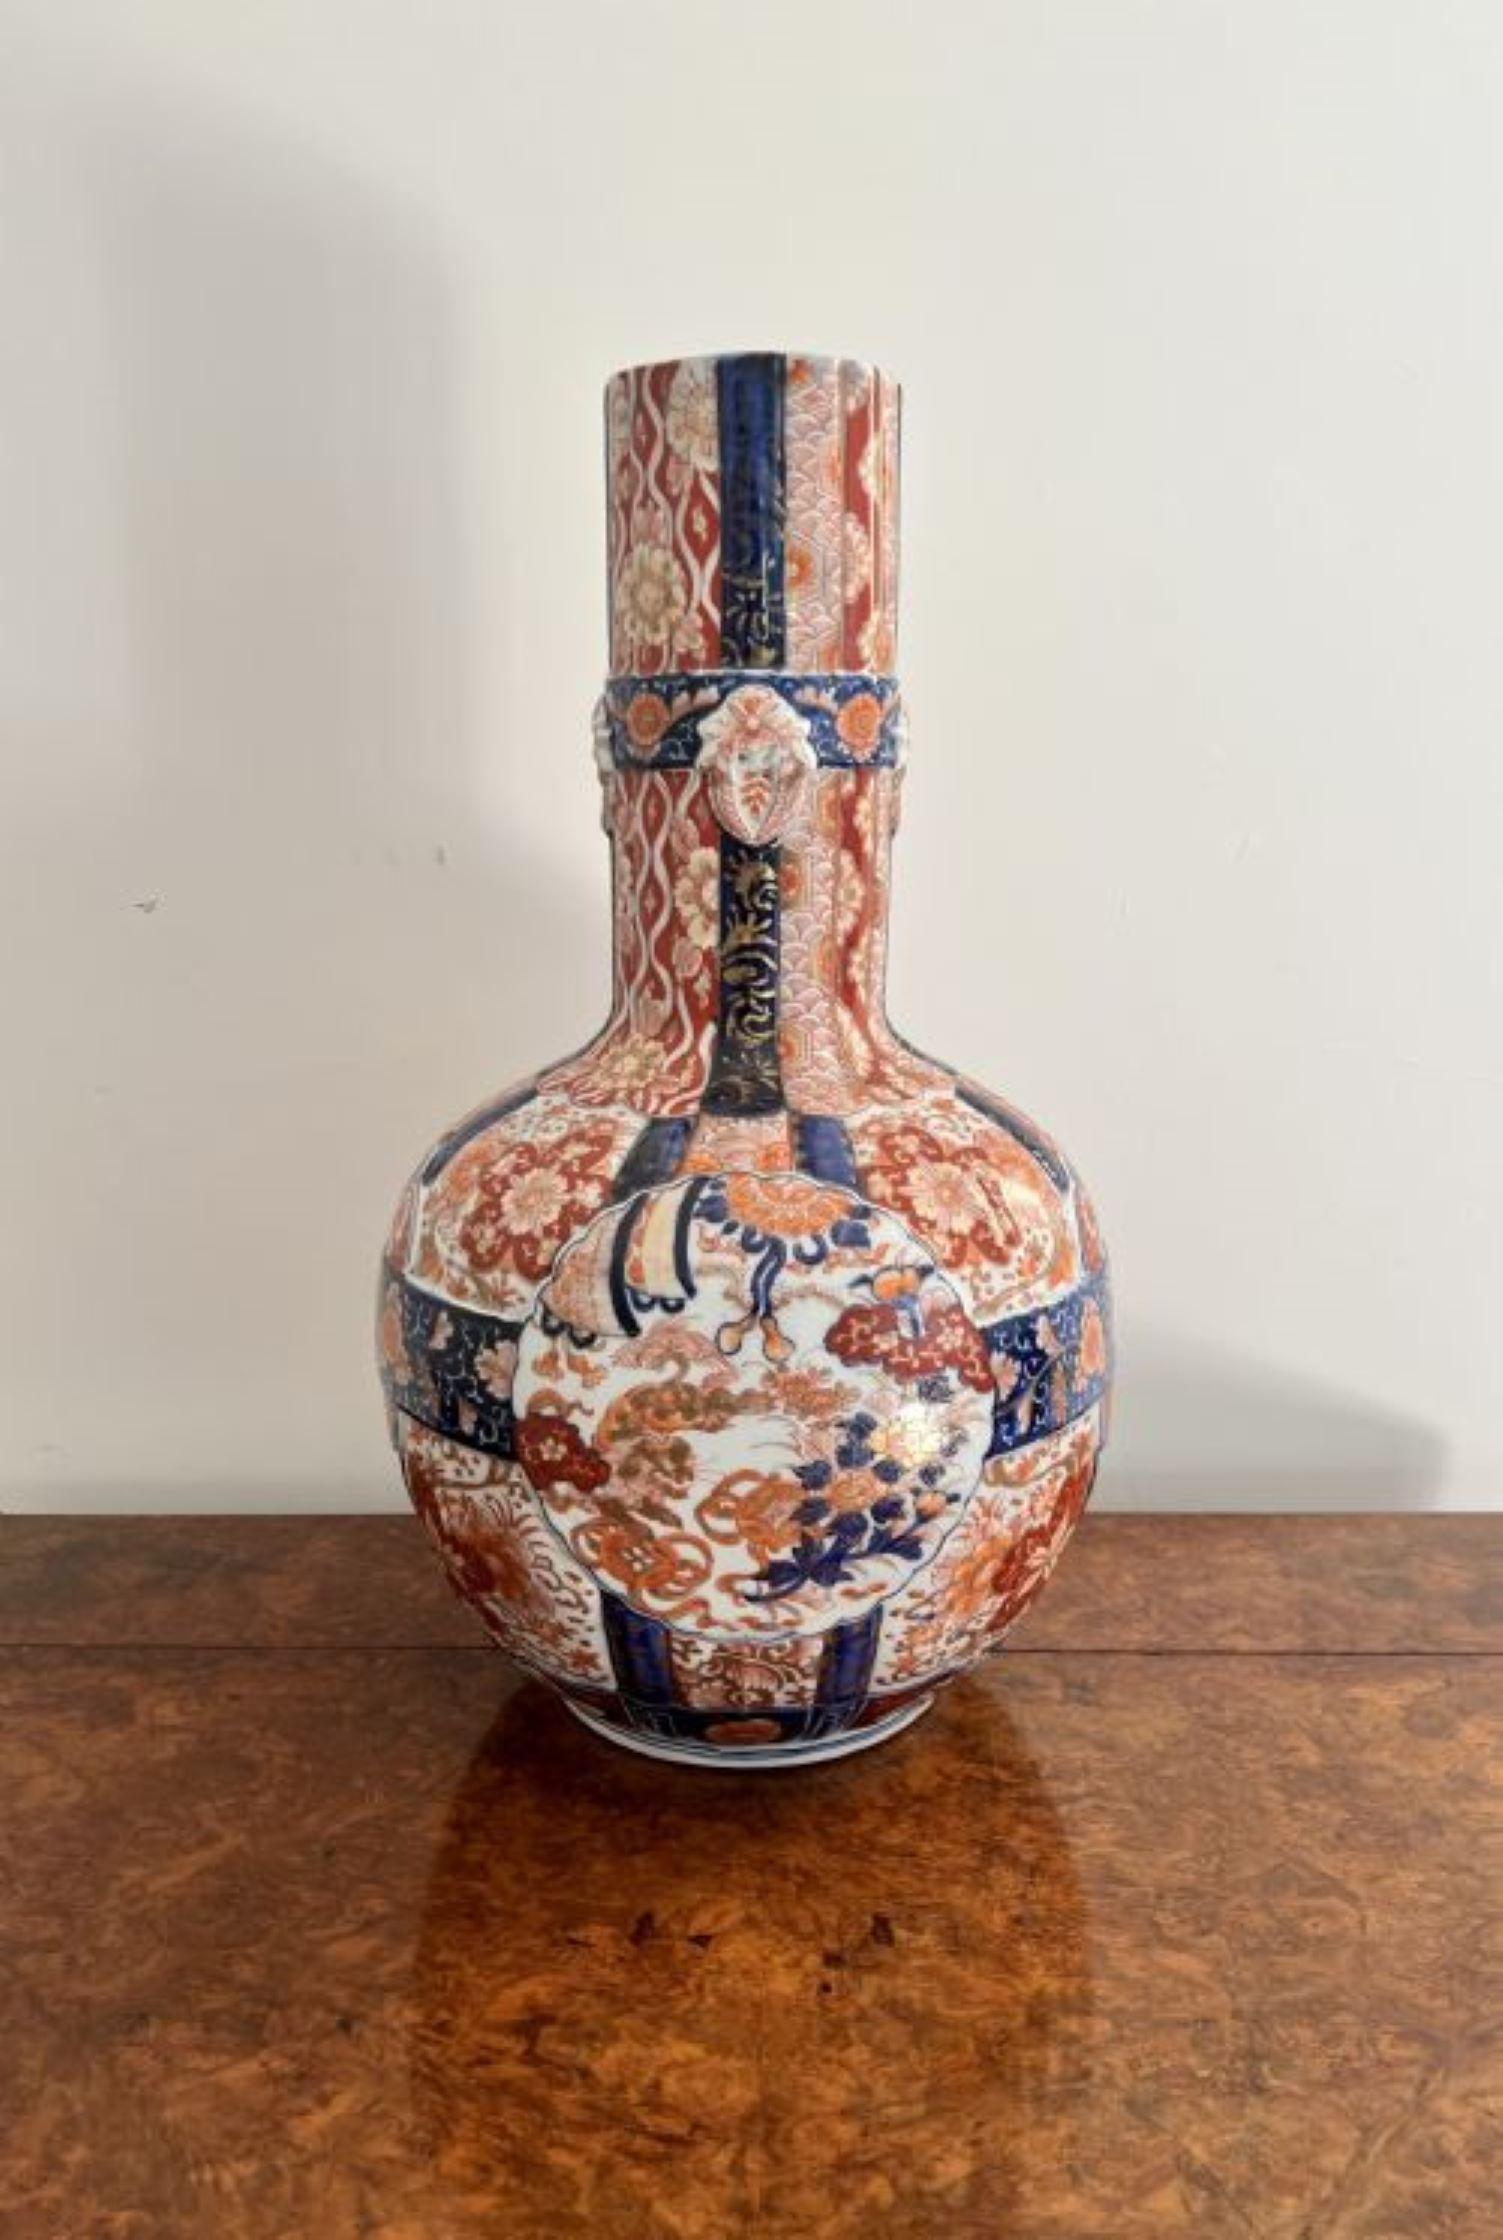 Superb quality unusual large antique 19th century Japanese Imari vase having a superb quality unusual large antique Japanese Imari vase fantastic decoration throughout with panels consisting of flowers, trees, dragons and scrolls hand painted in